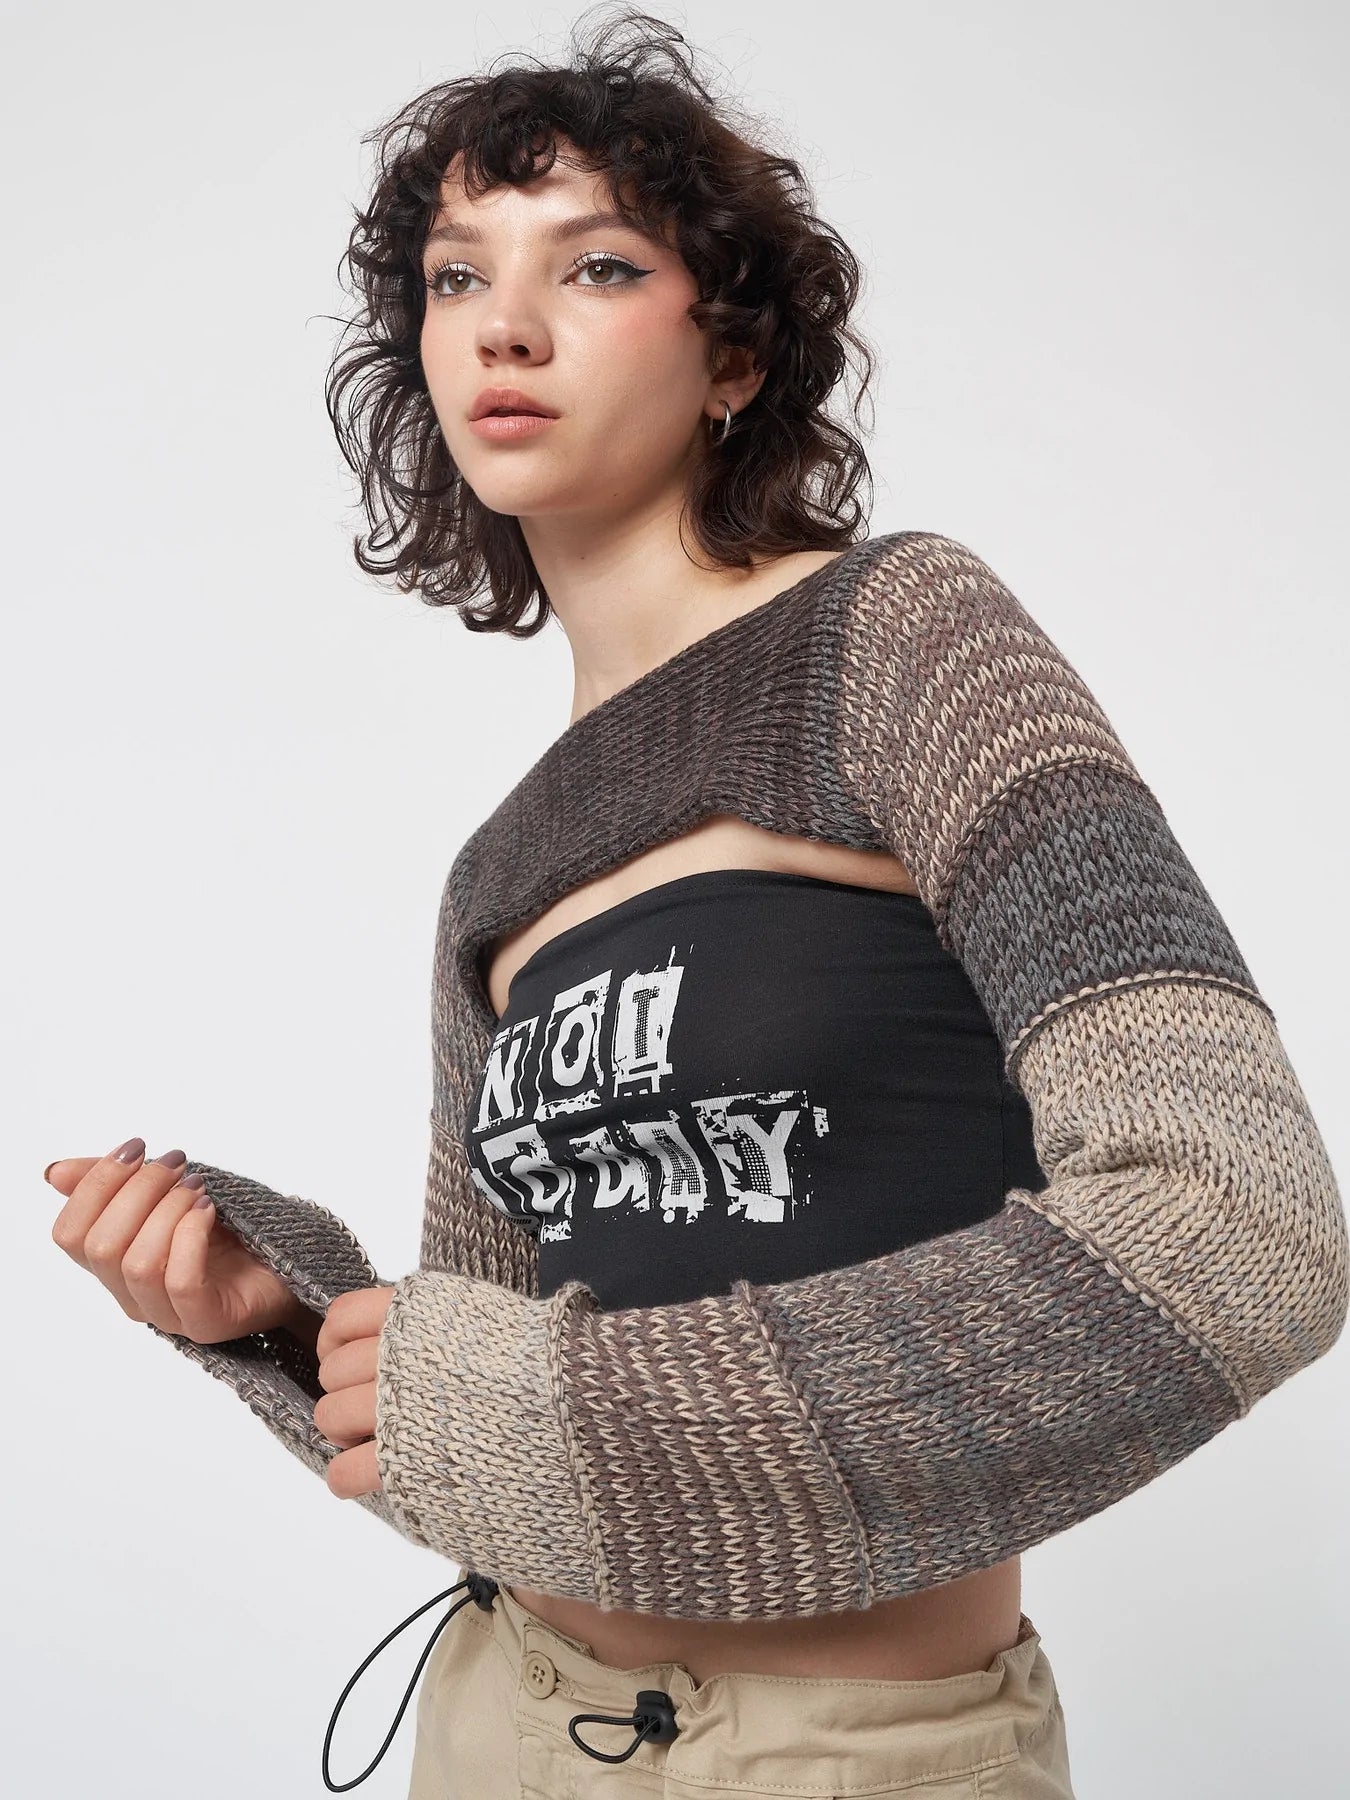 Minga London FUSION BROWN PATCHWORK KNITTED SHRUG TOP